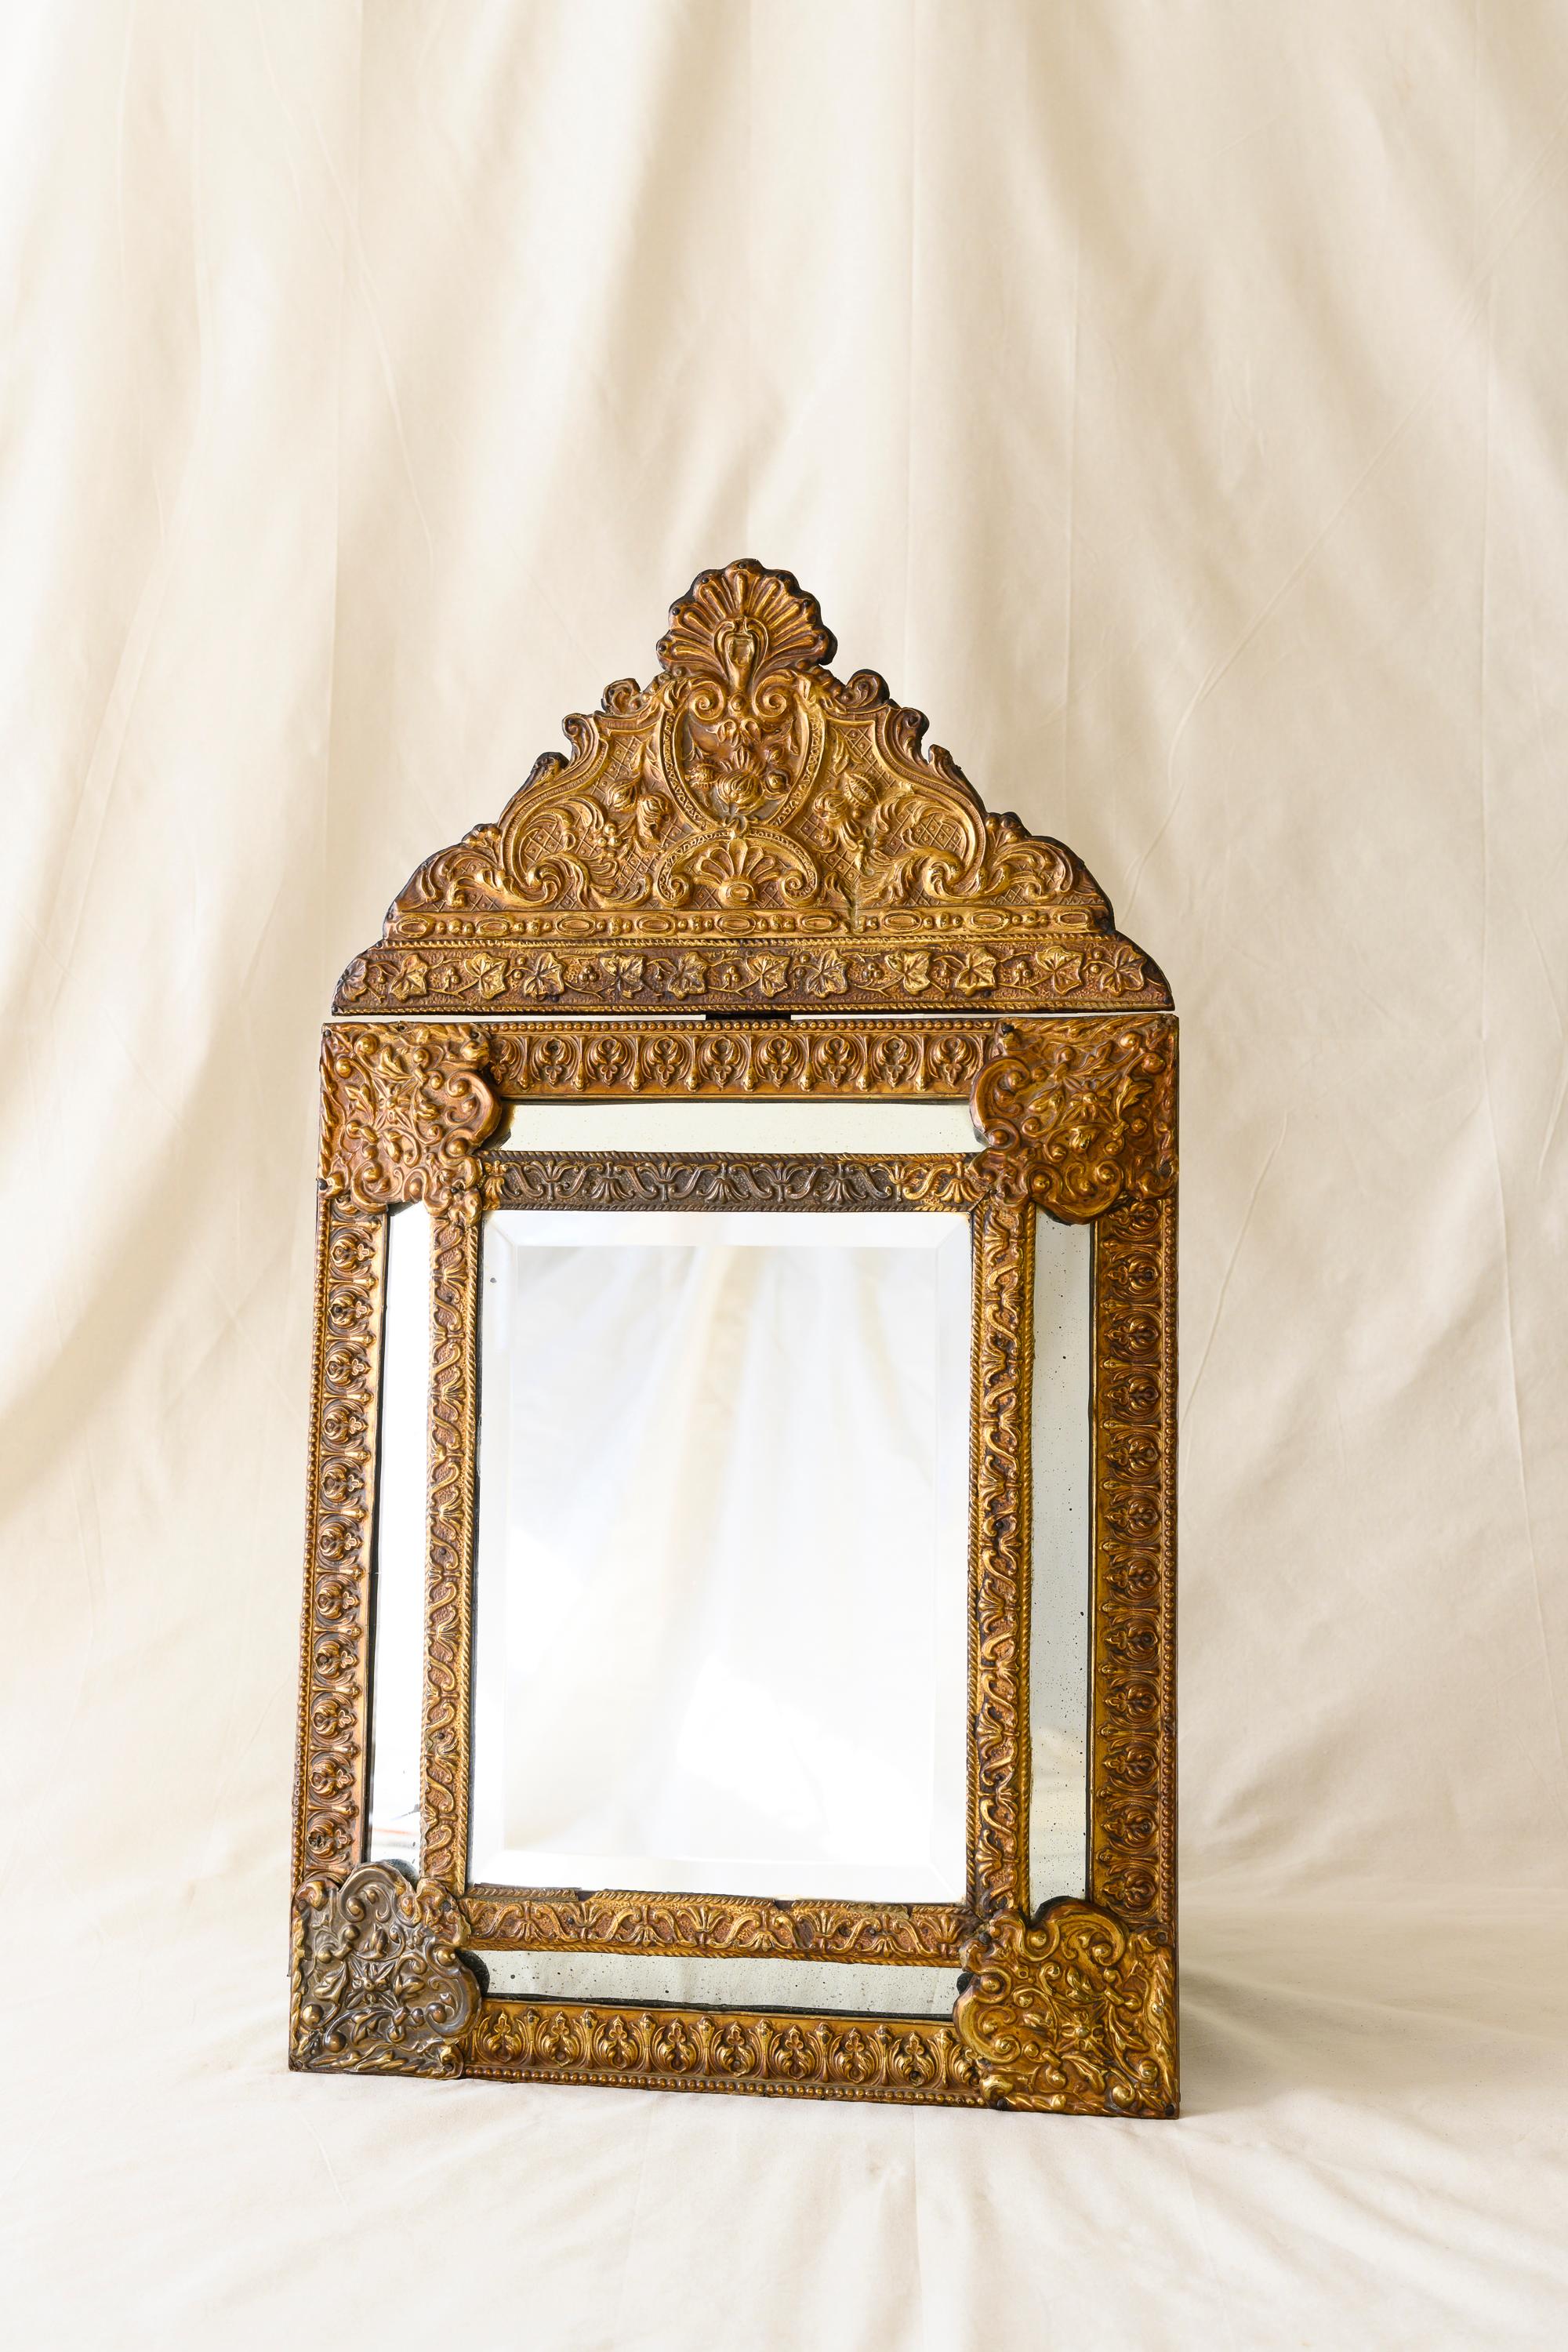 Louis XIII style gilt-copper and wood mirror, featuring an elevated rectangular mercury glass plate in an intricate foliage and scroll frame with mirrored borders, topped by a detachable crest of scrolled foliage and a frieze of berried grape